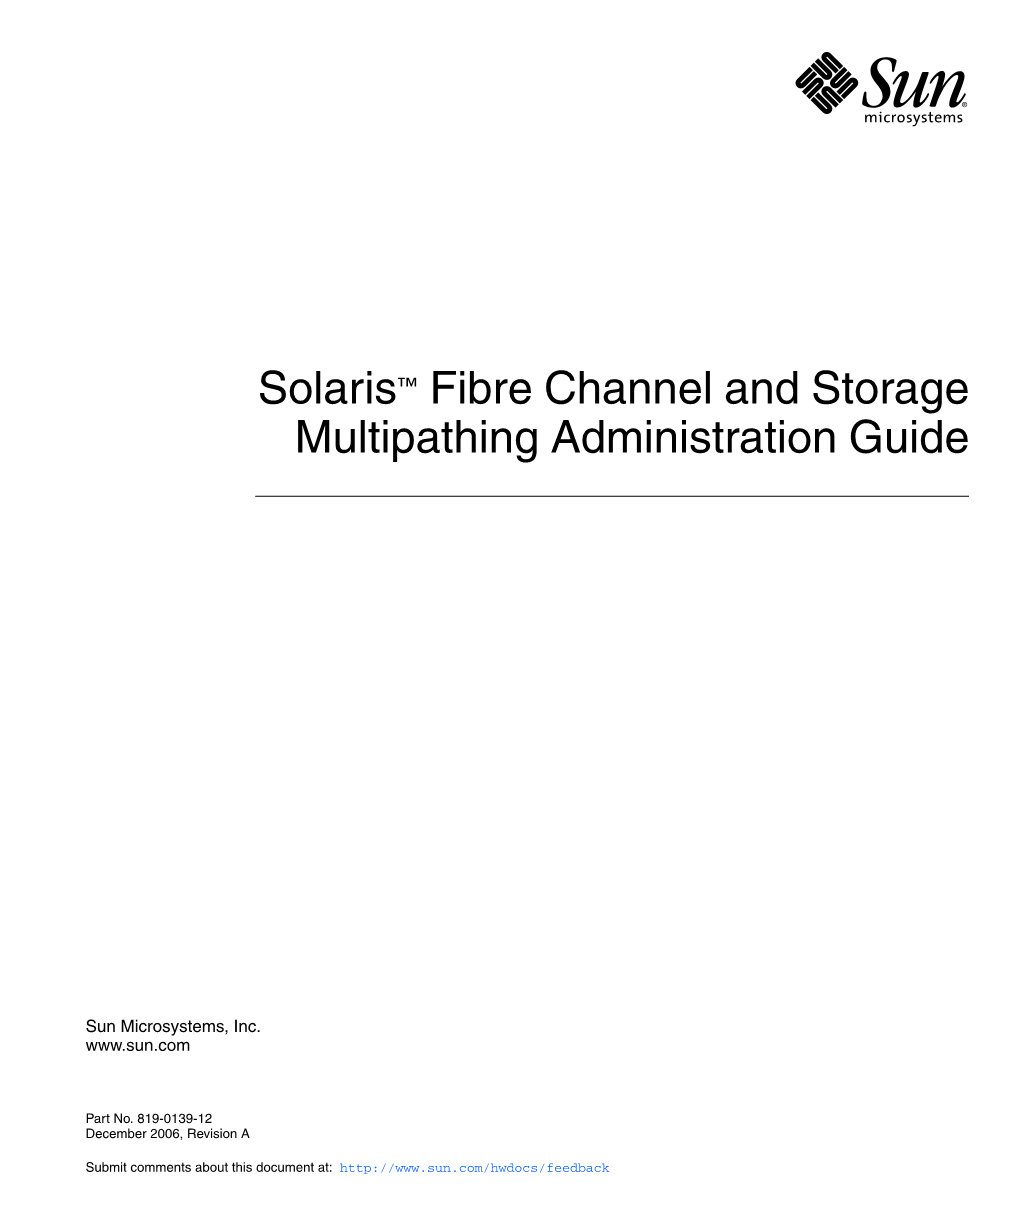 Solaris Fibre Channel Storage Configuration and Multipathing